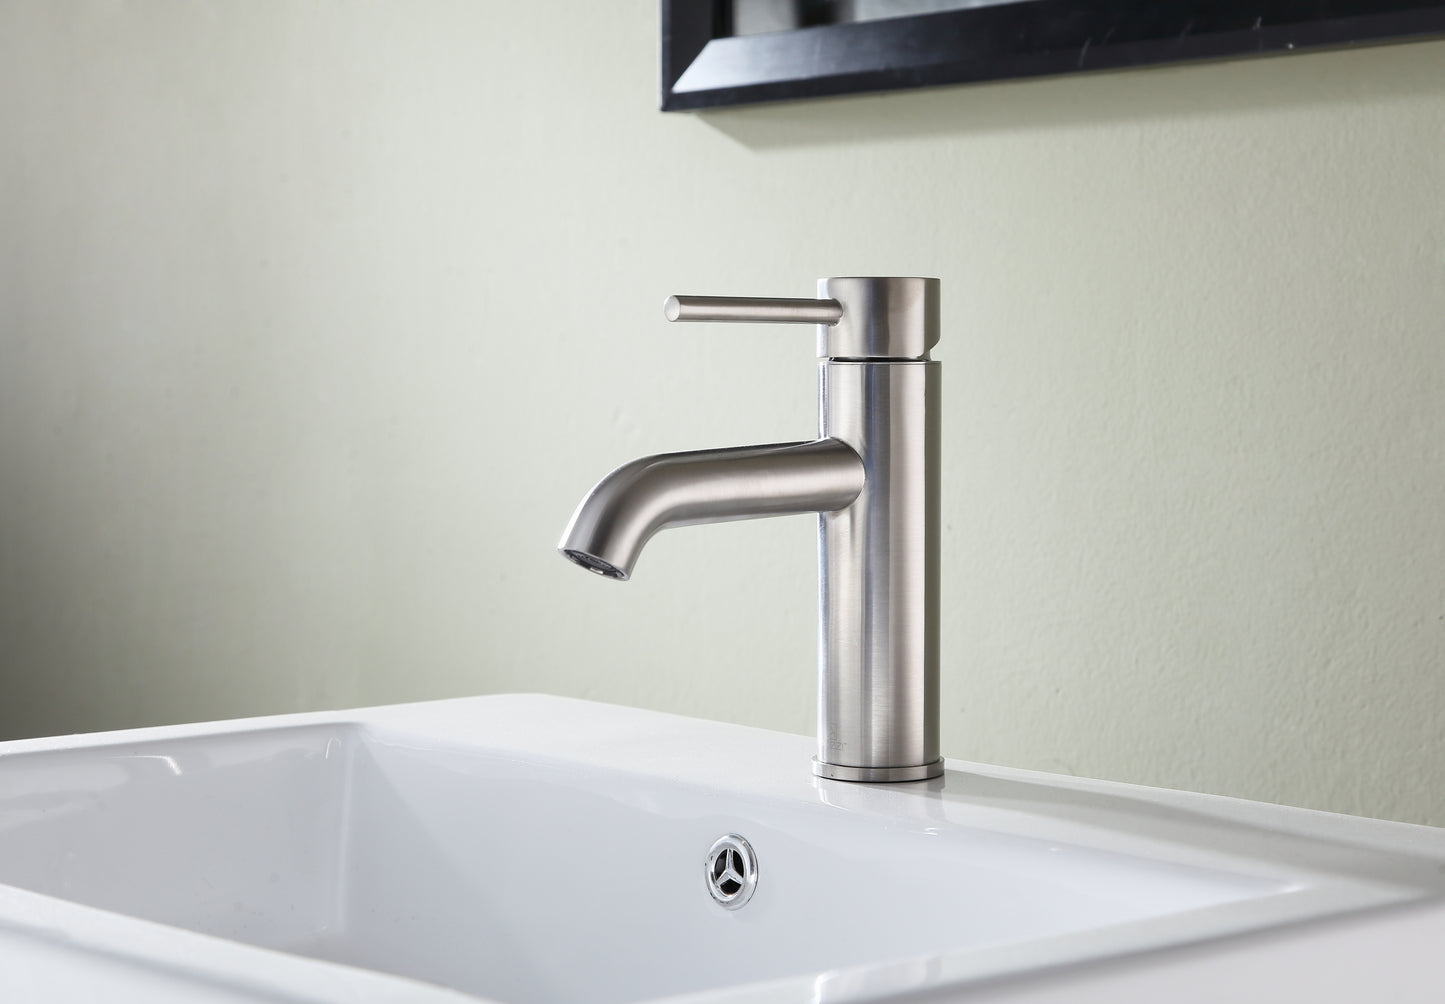 L-AZ107BN - Valle Single Hole Single Handle Bathroom Faucet in Brushed Nickel